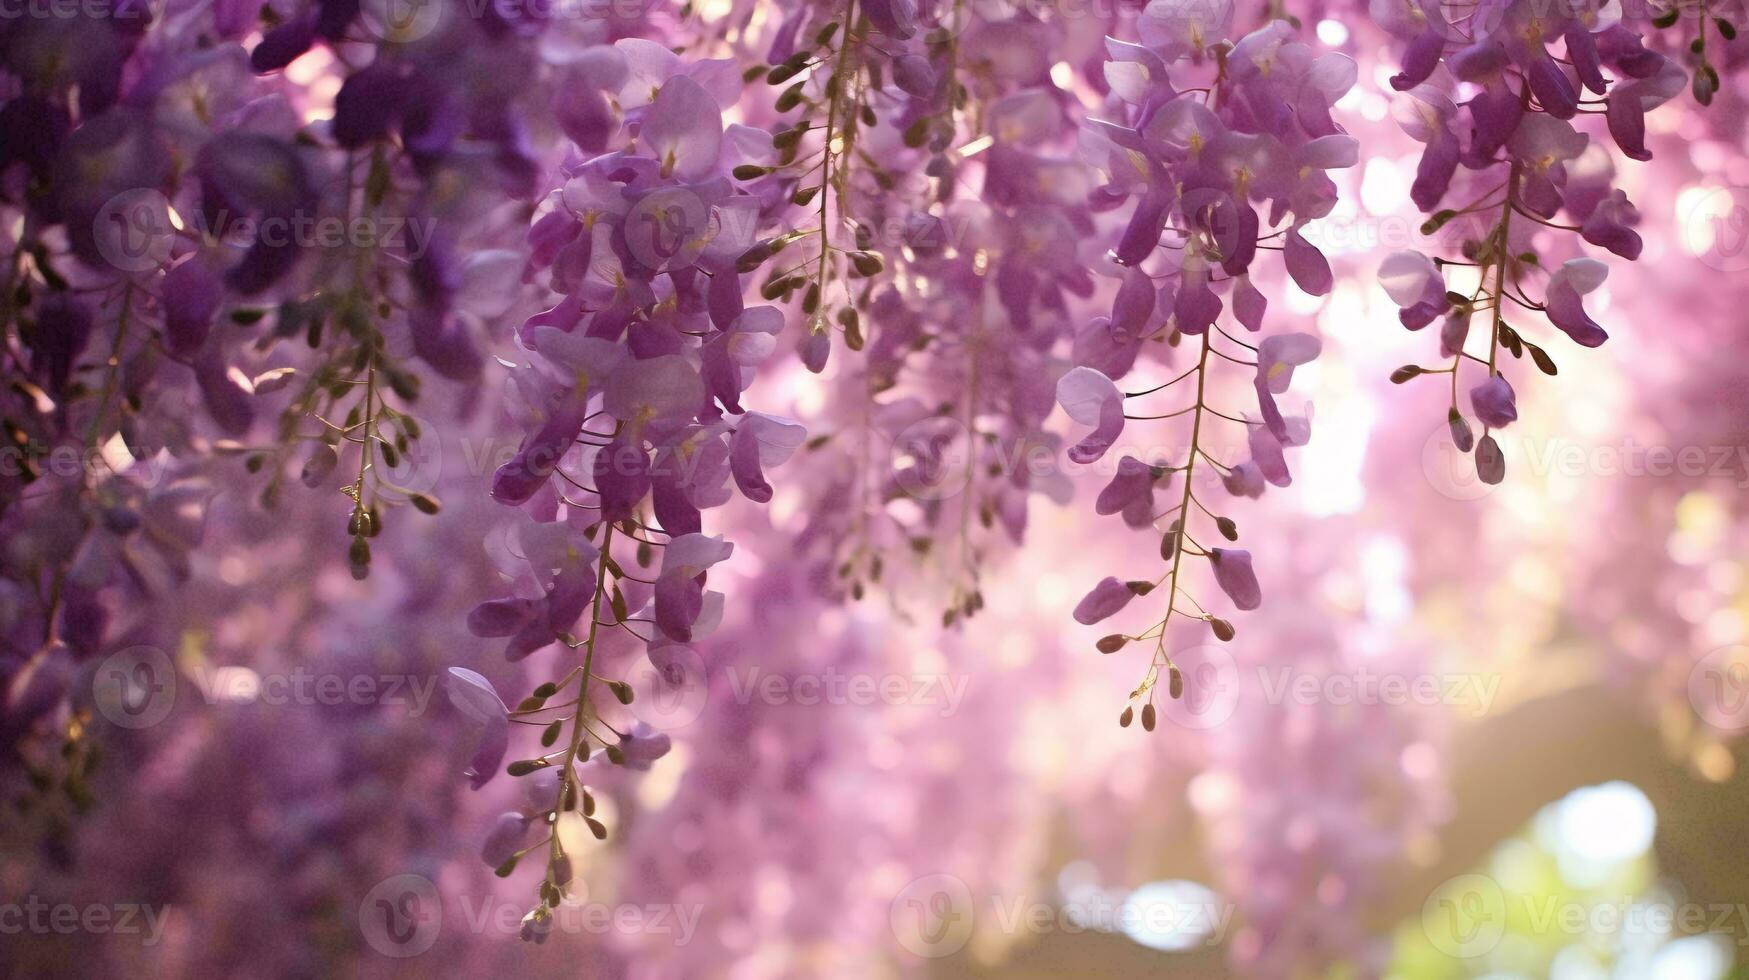 A vibrant display of purple flowers hanging from a tree AI Generated photo